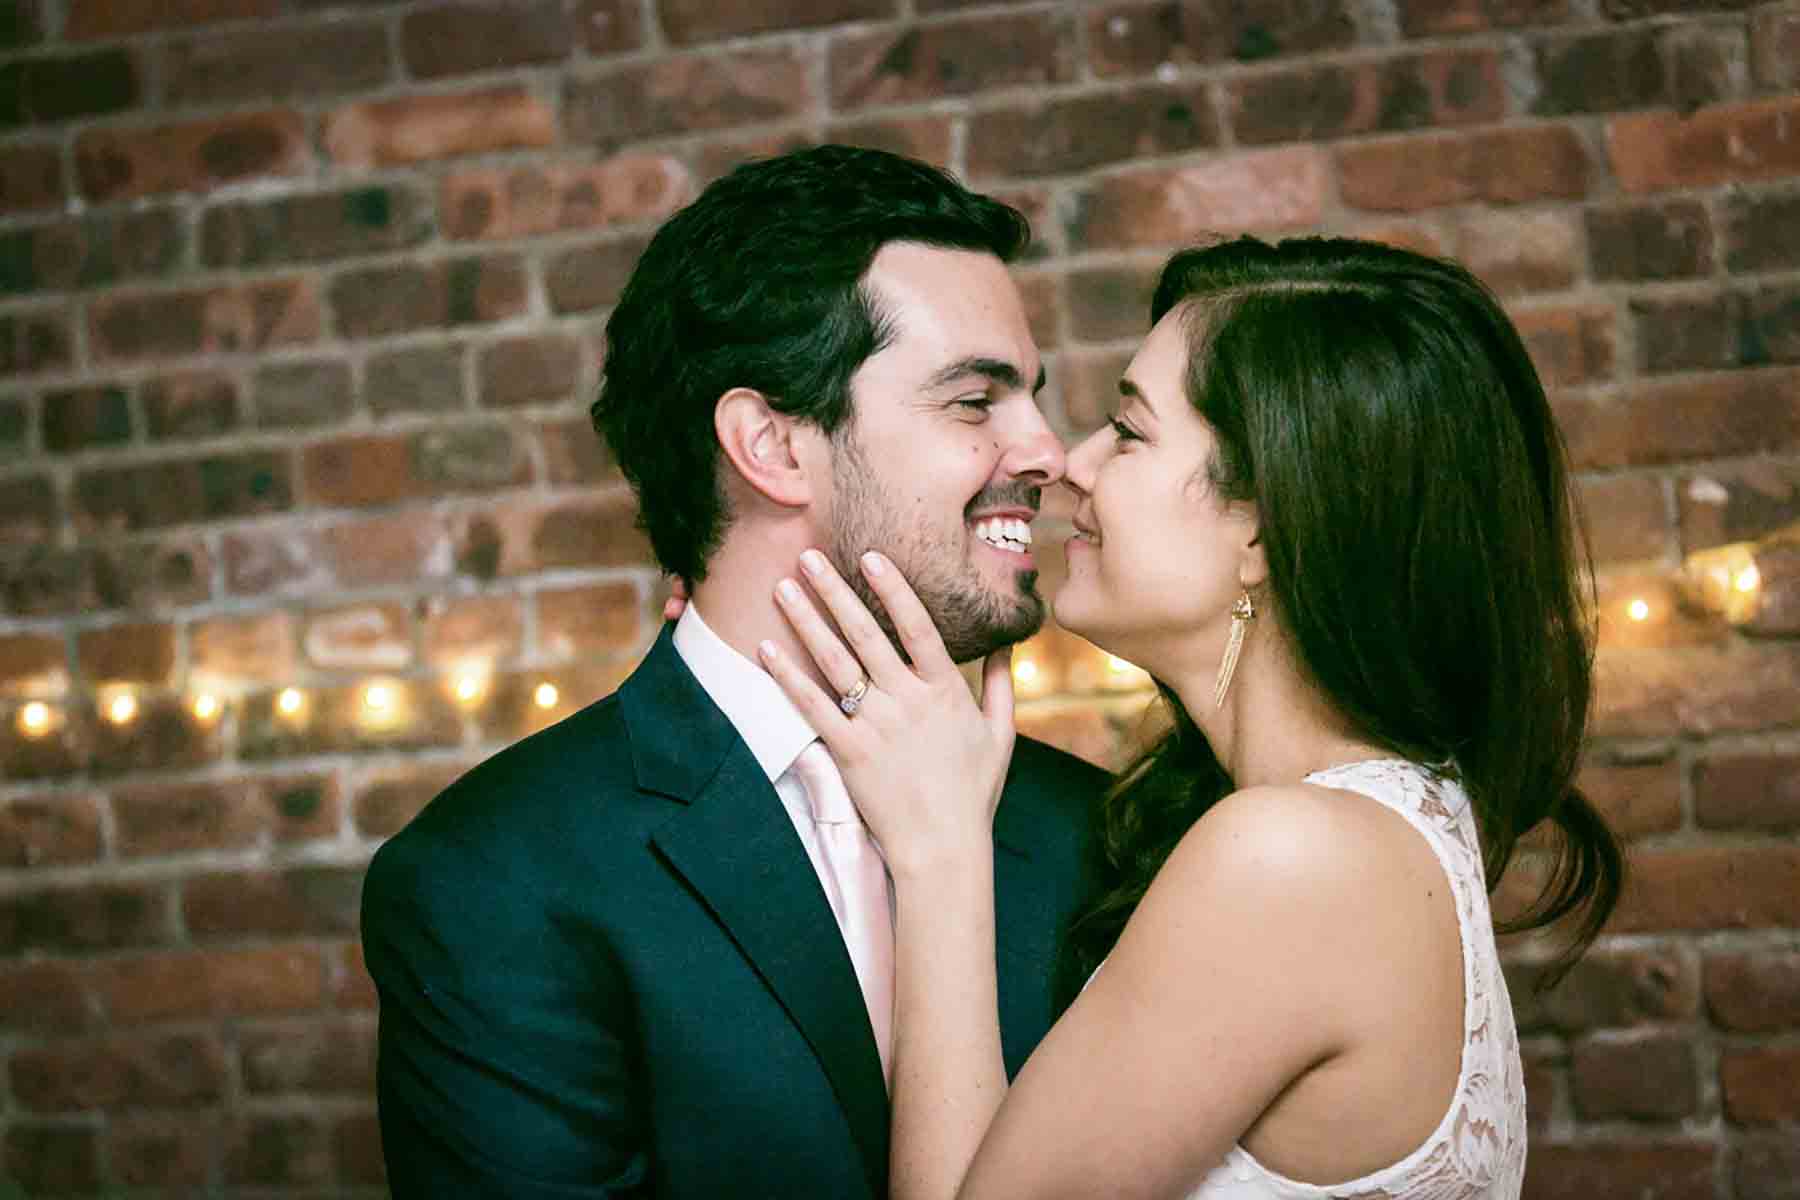 Bride holding groom's face in front of brick wall for an article on how to save money on wedding photography